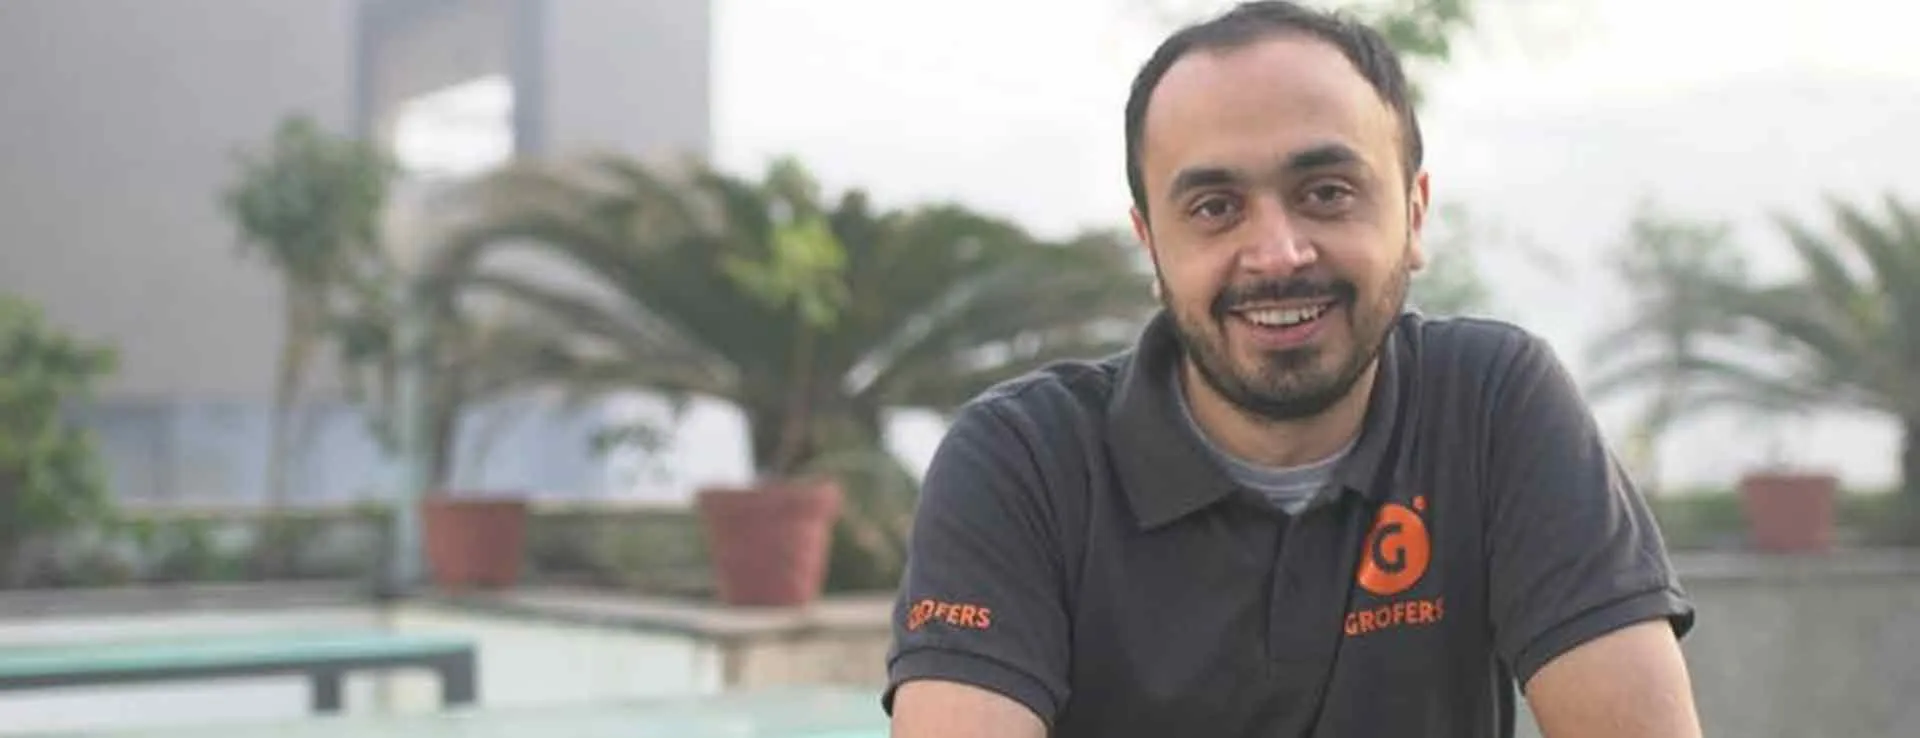 Grofer's Albinder Dhindsa: The fear of failure keeps me going